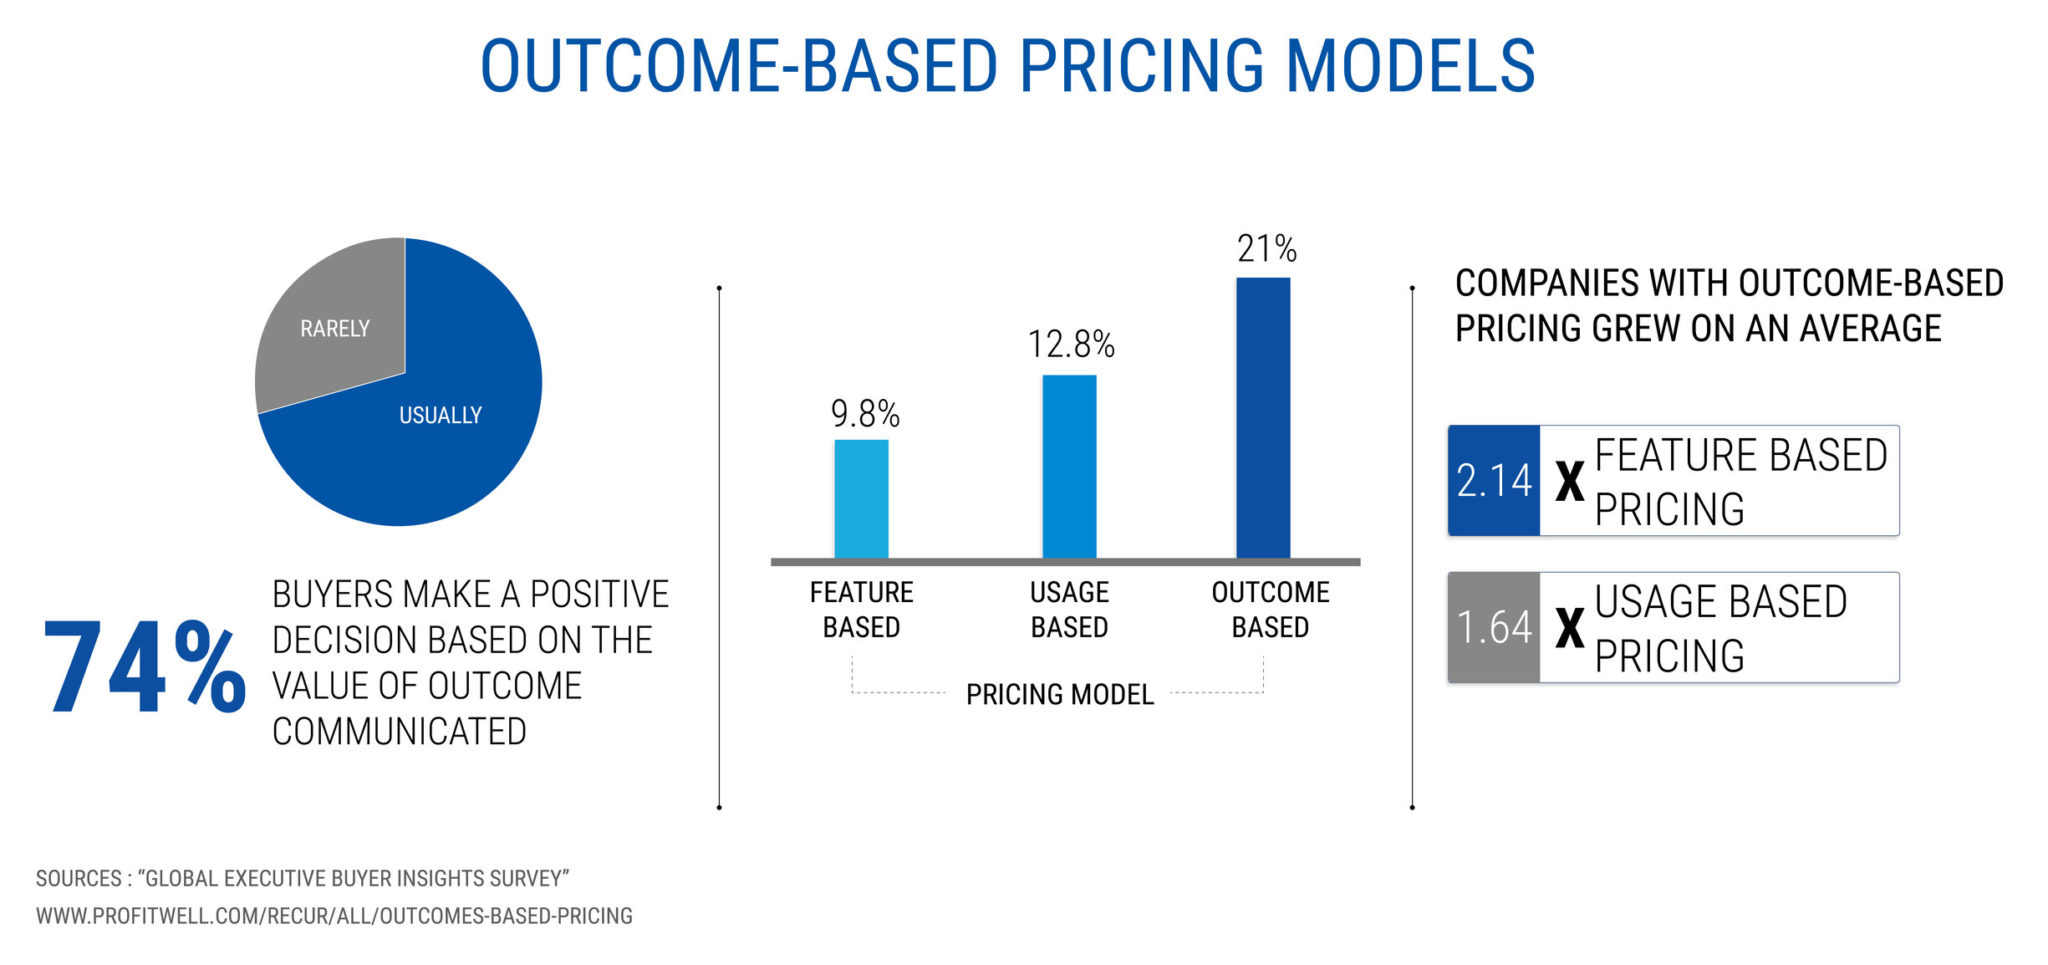 OUTCOME-BASED PRICING MODELS